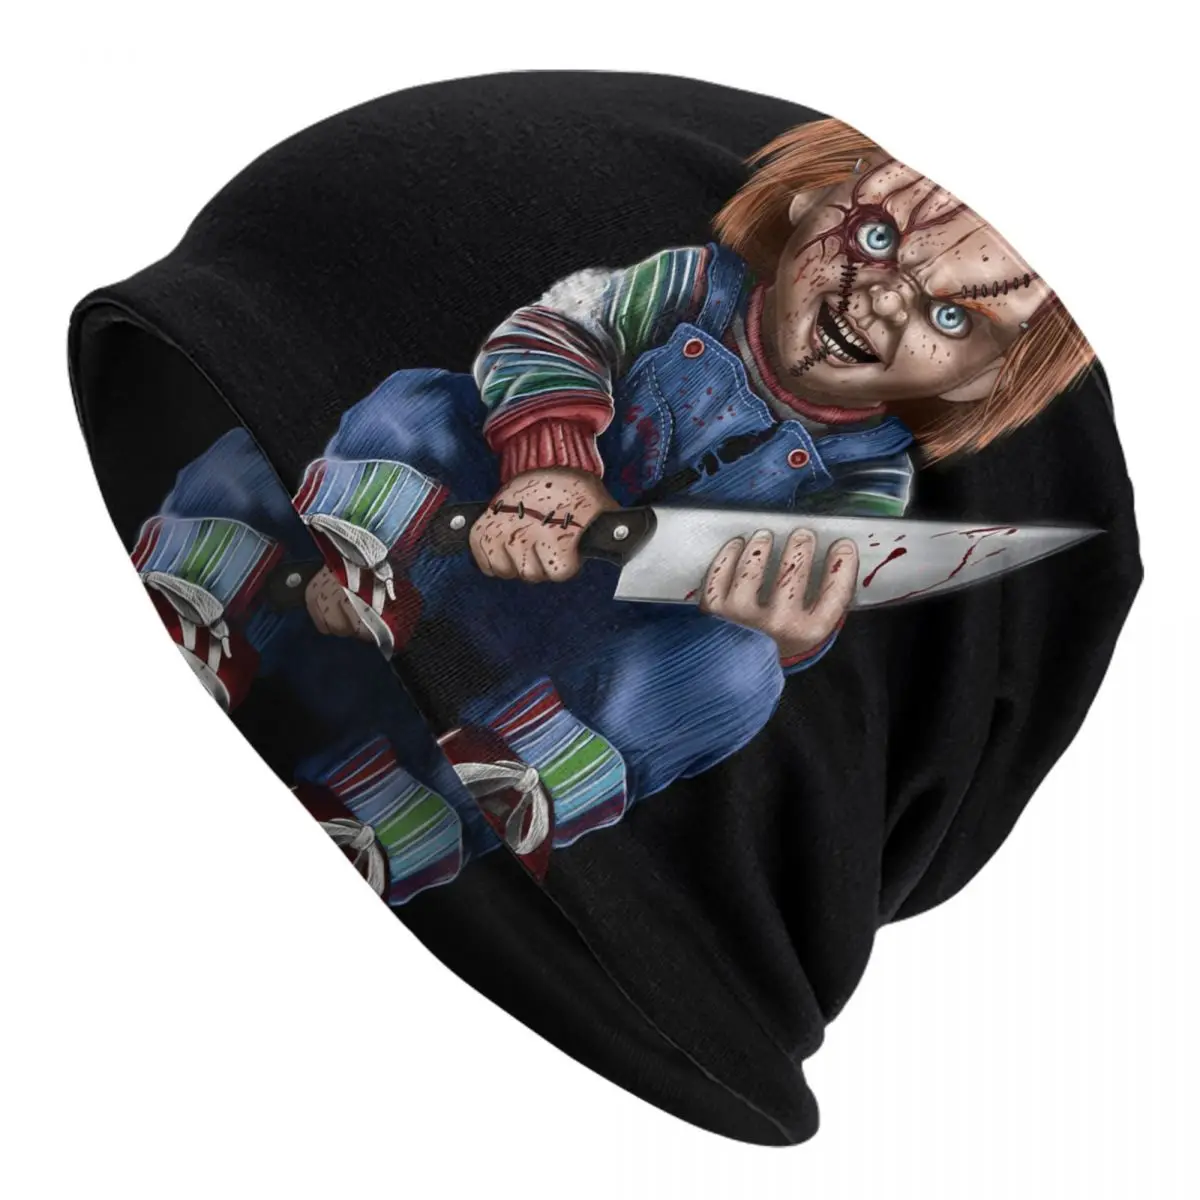 

Are You Ready Bonnet Homme Outdoor Thin Hat Child's Play Chucky Horror Movie Beanies Caps For Men Women Style Cotton Hats